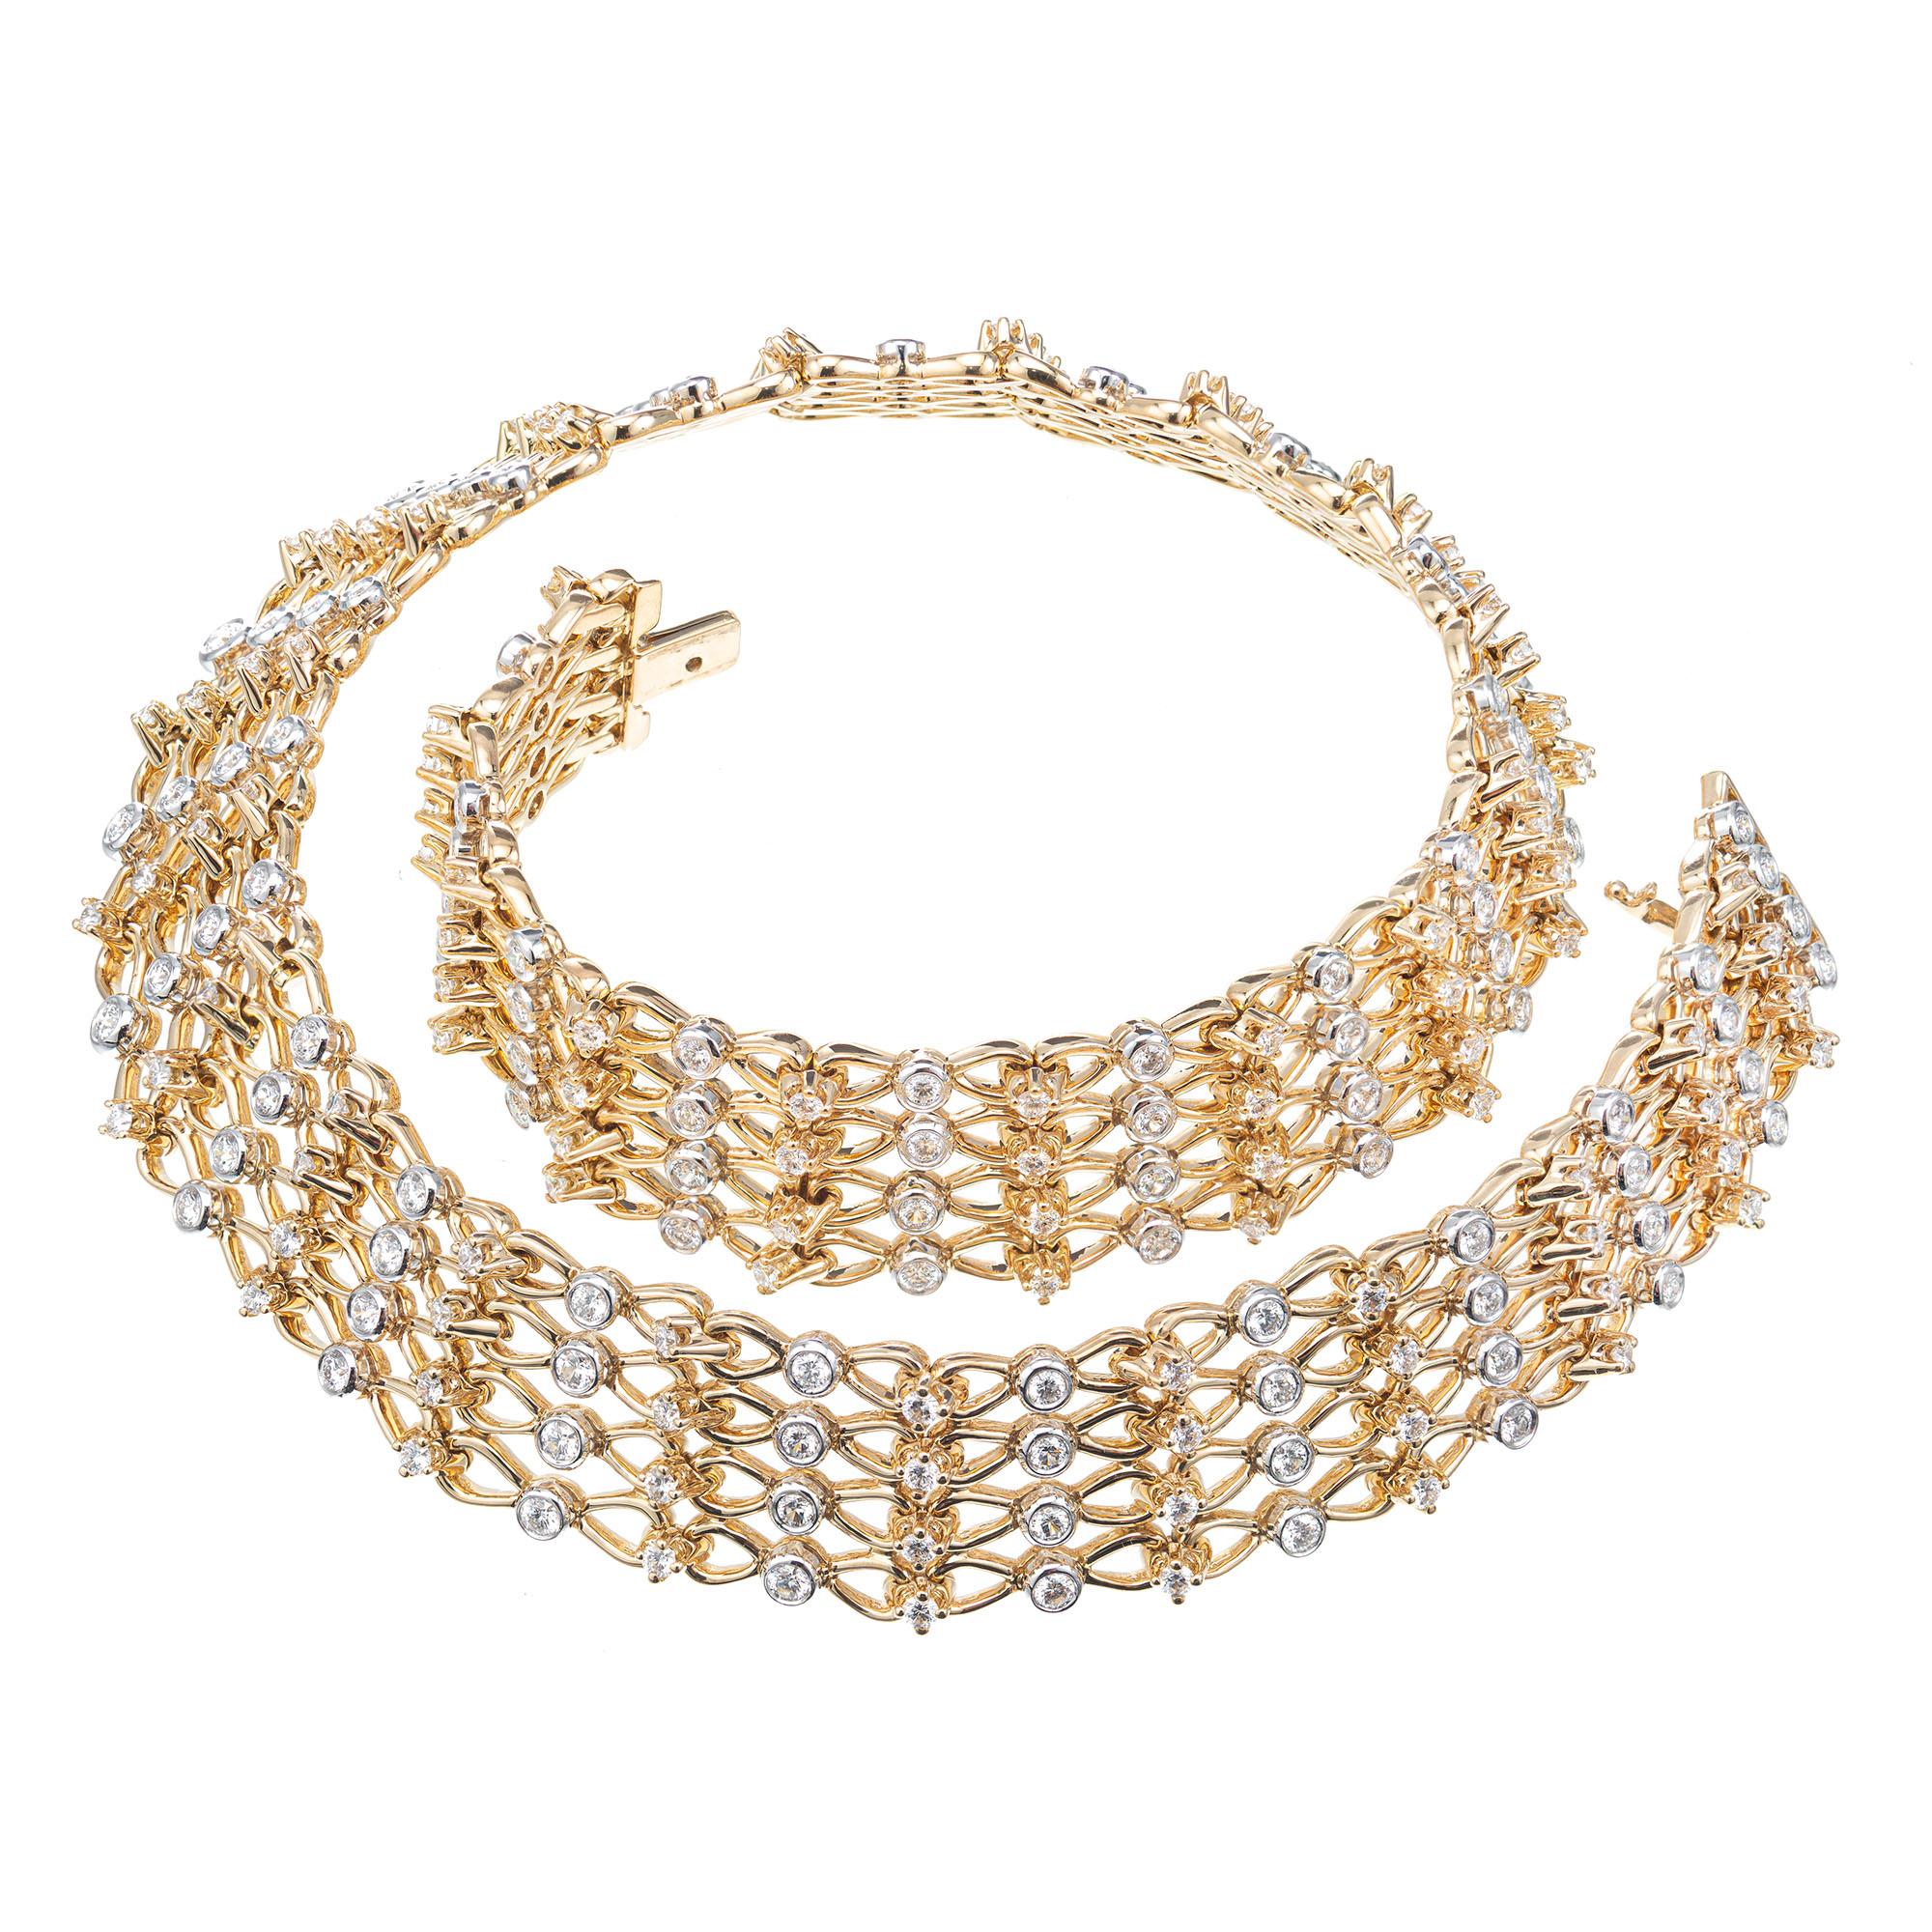 224 round brilliant cut diamond 18-Inch-long, 18k yellow gold and platinum collar style necklace. 

112 round brilliant cut diamonds G VS, approx. 6.84cts
112 round brilliant cut diamonds G VS, approx. 3.36cts 
18k yellow gold 
Platinum 750